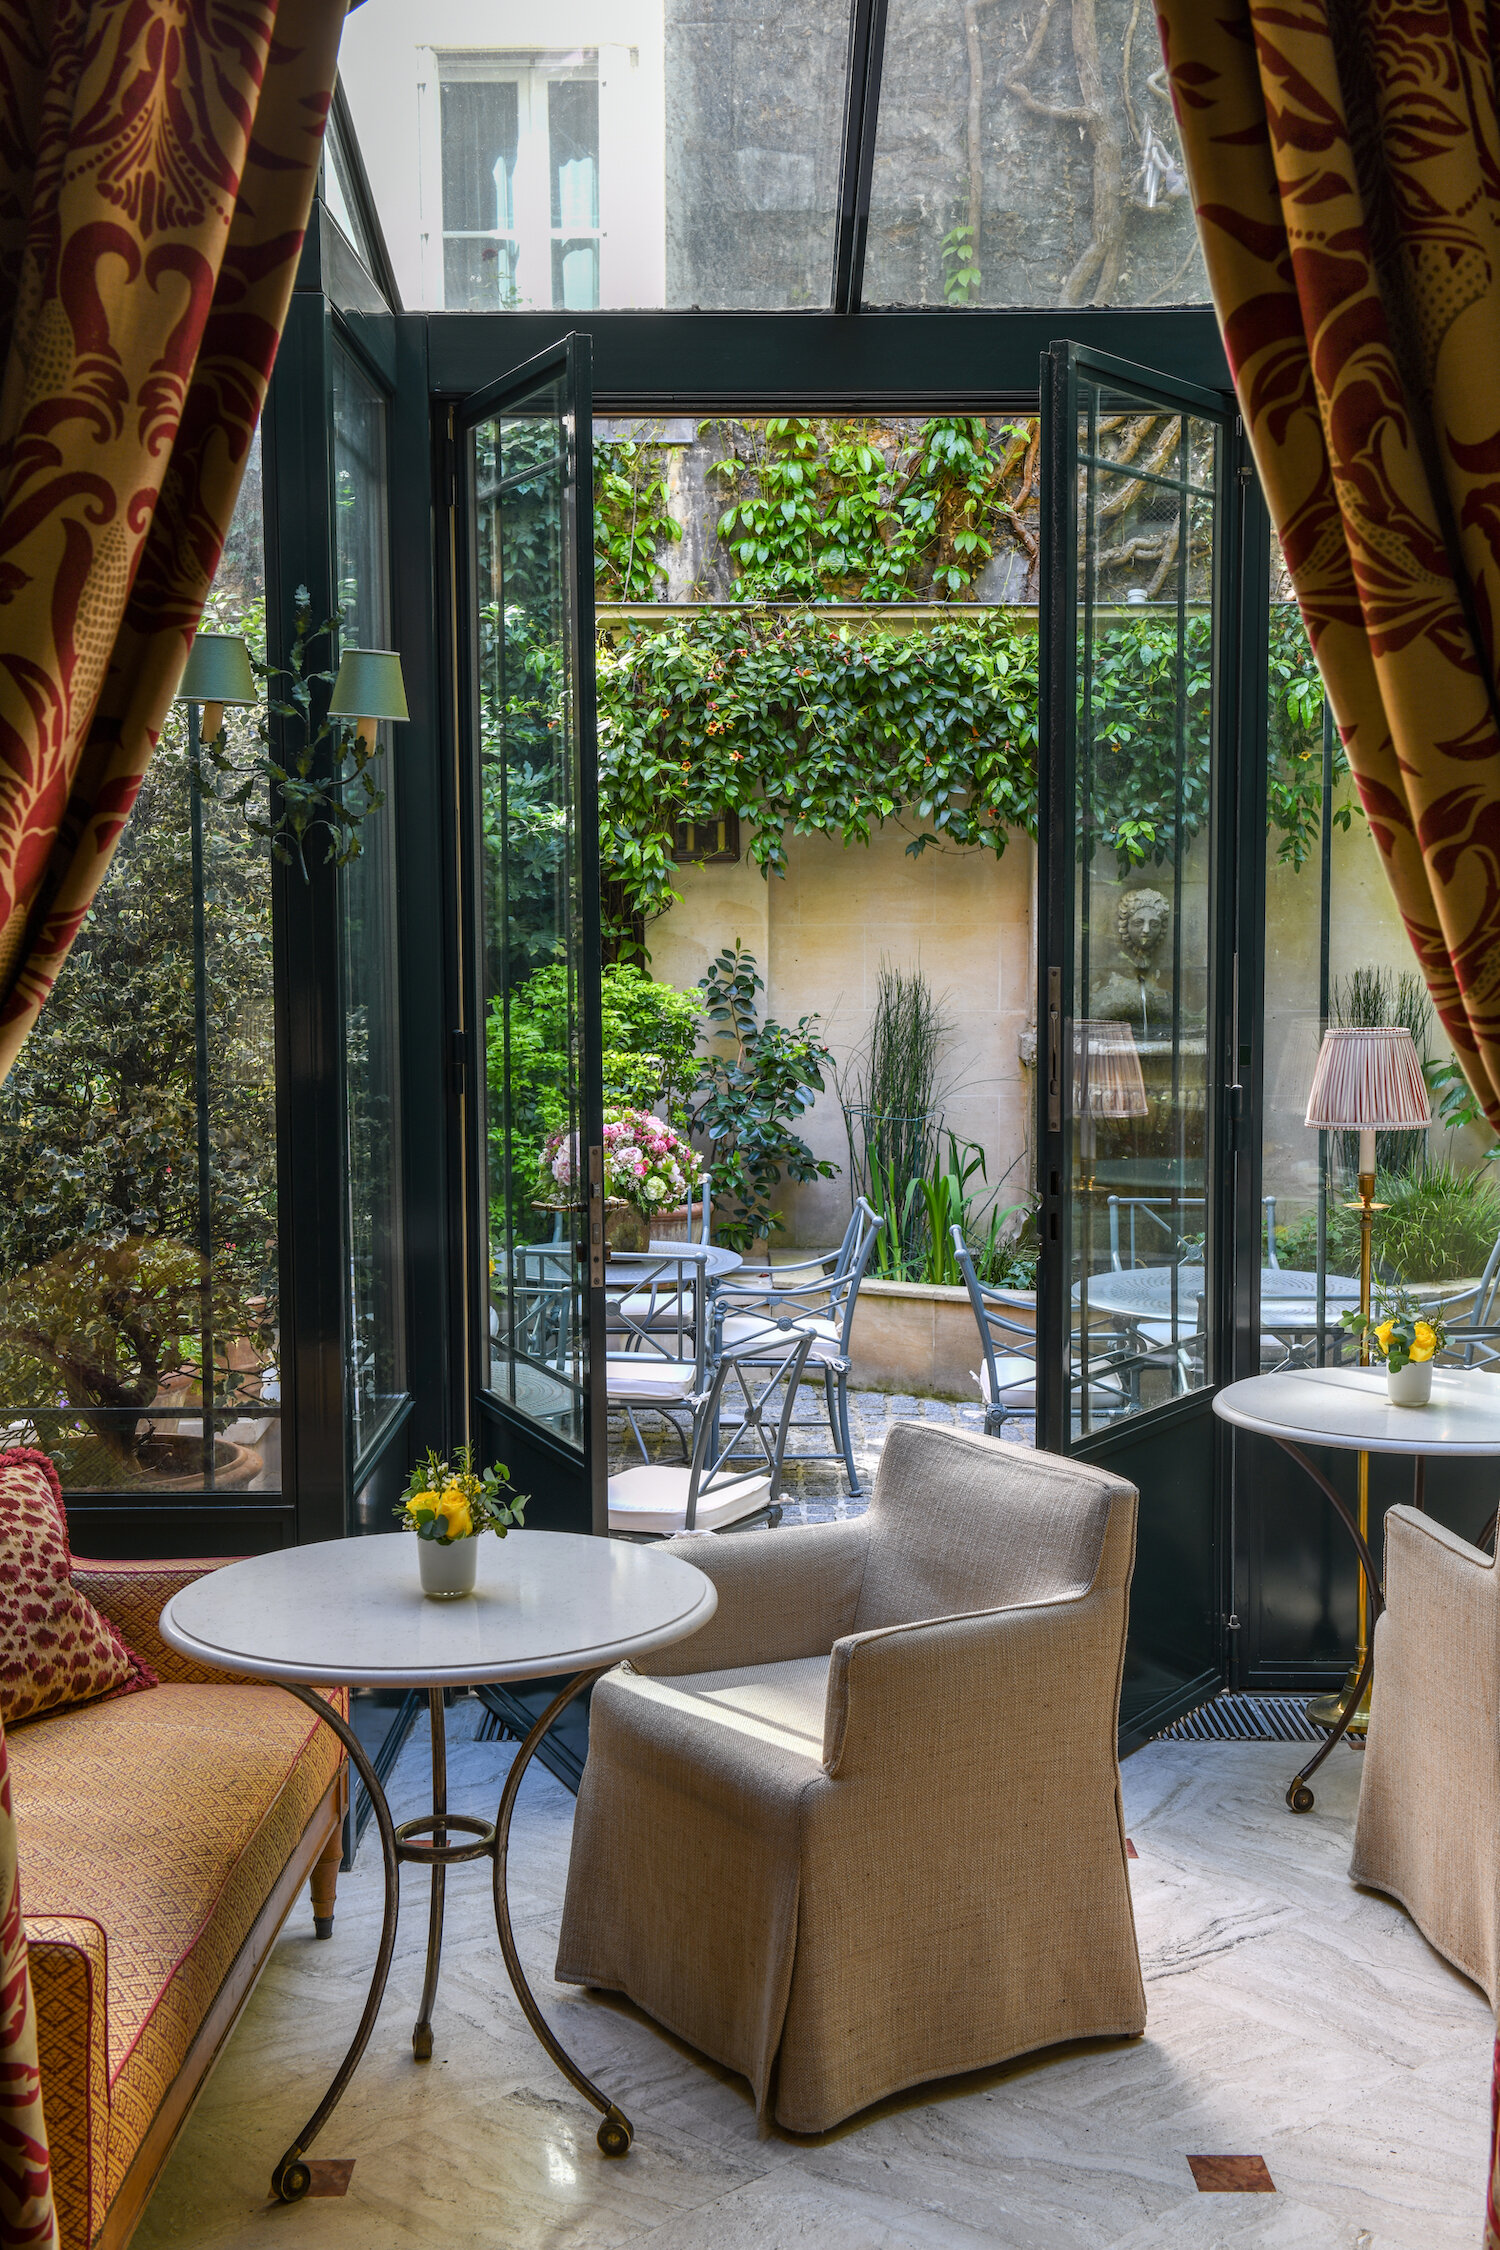 Travelling to Paris with children - Best hotels in the 6th - Hotel de L'Abbaye with garden - L'Île aux Fées review